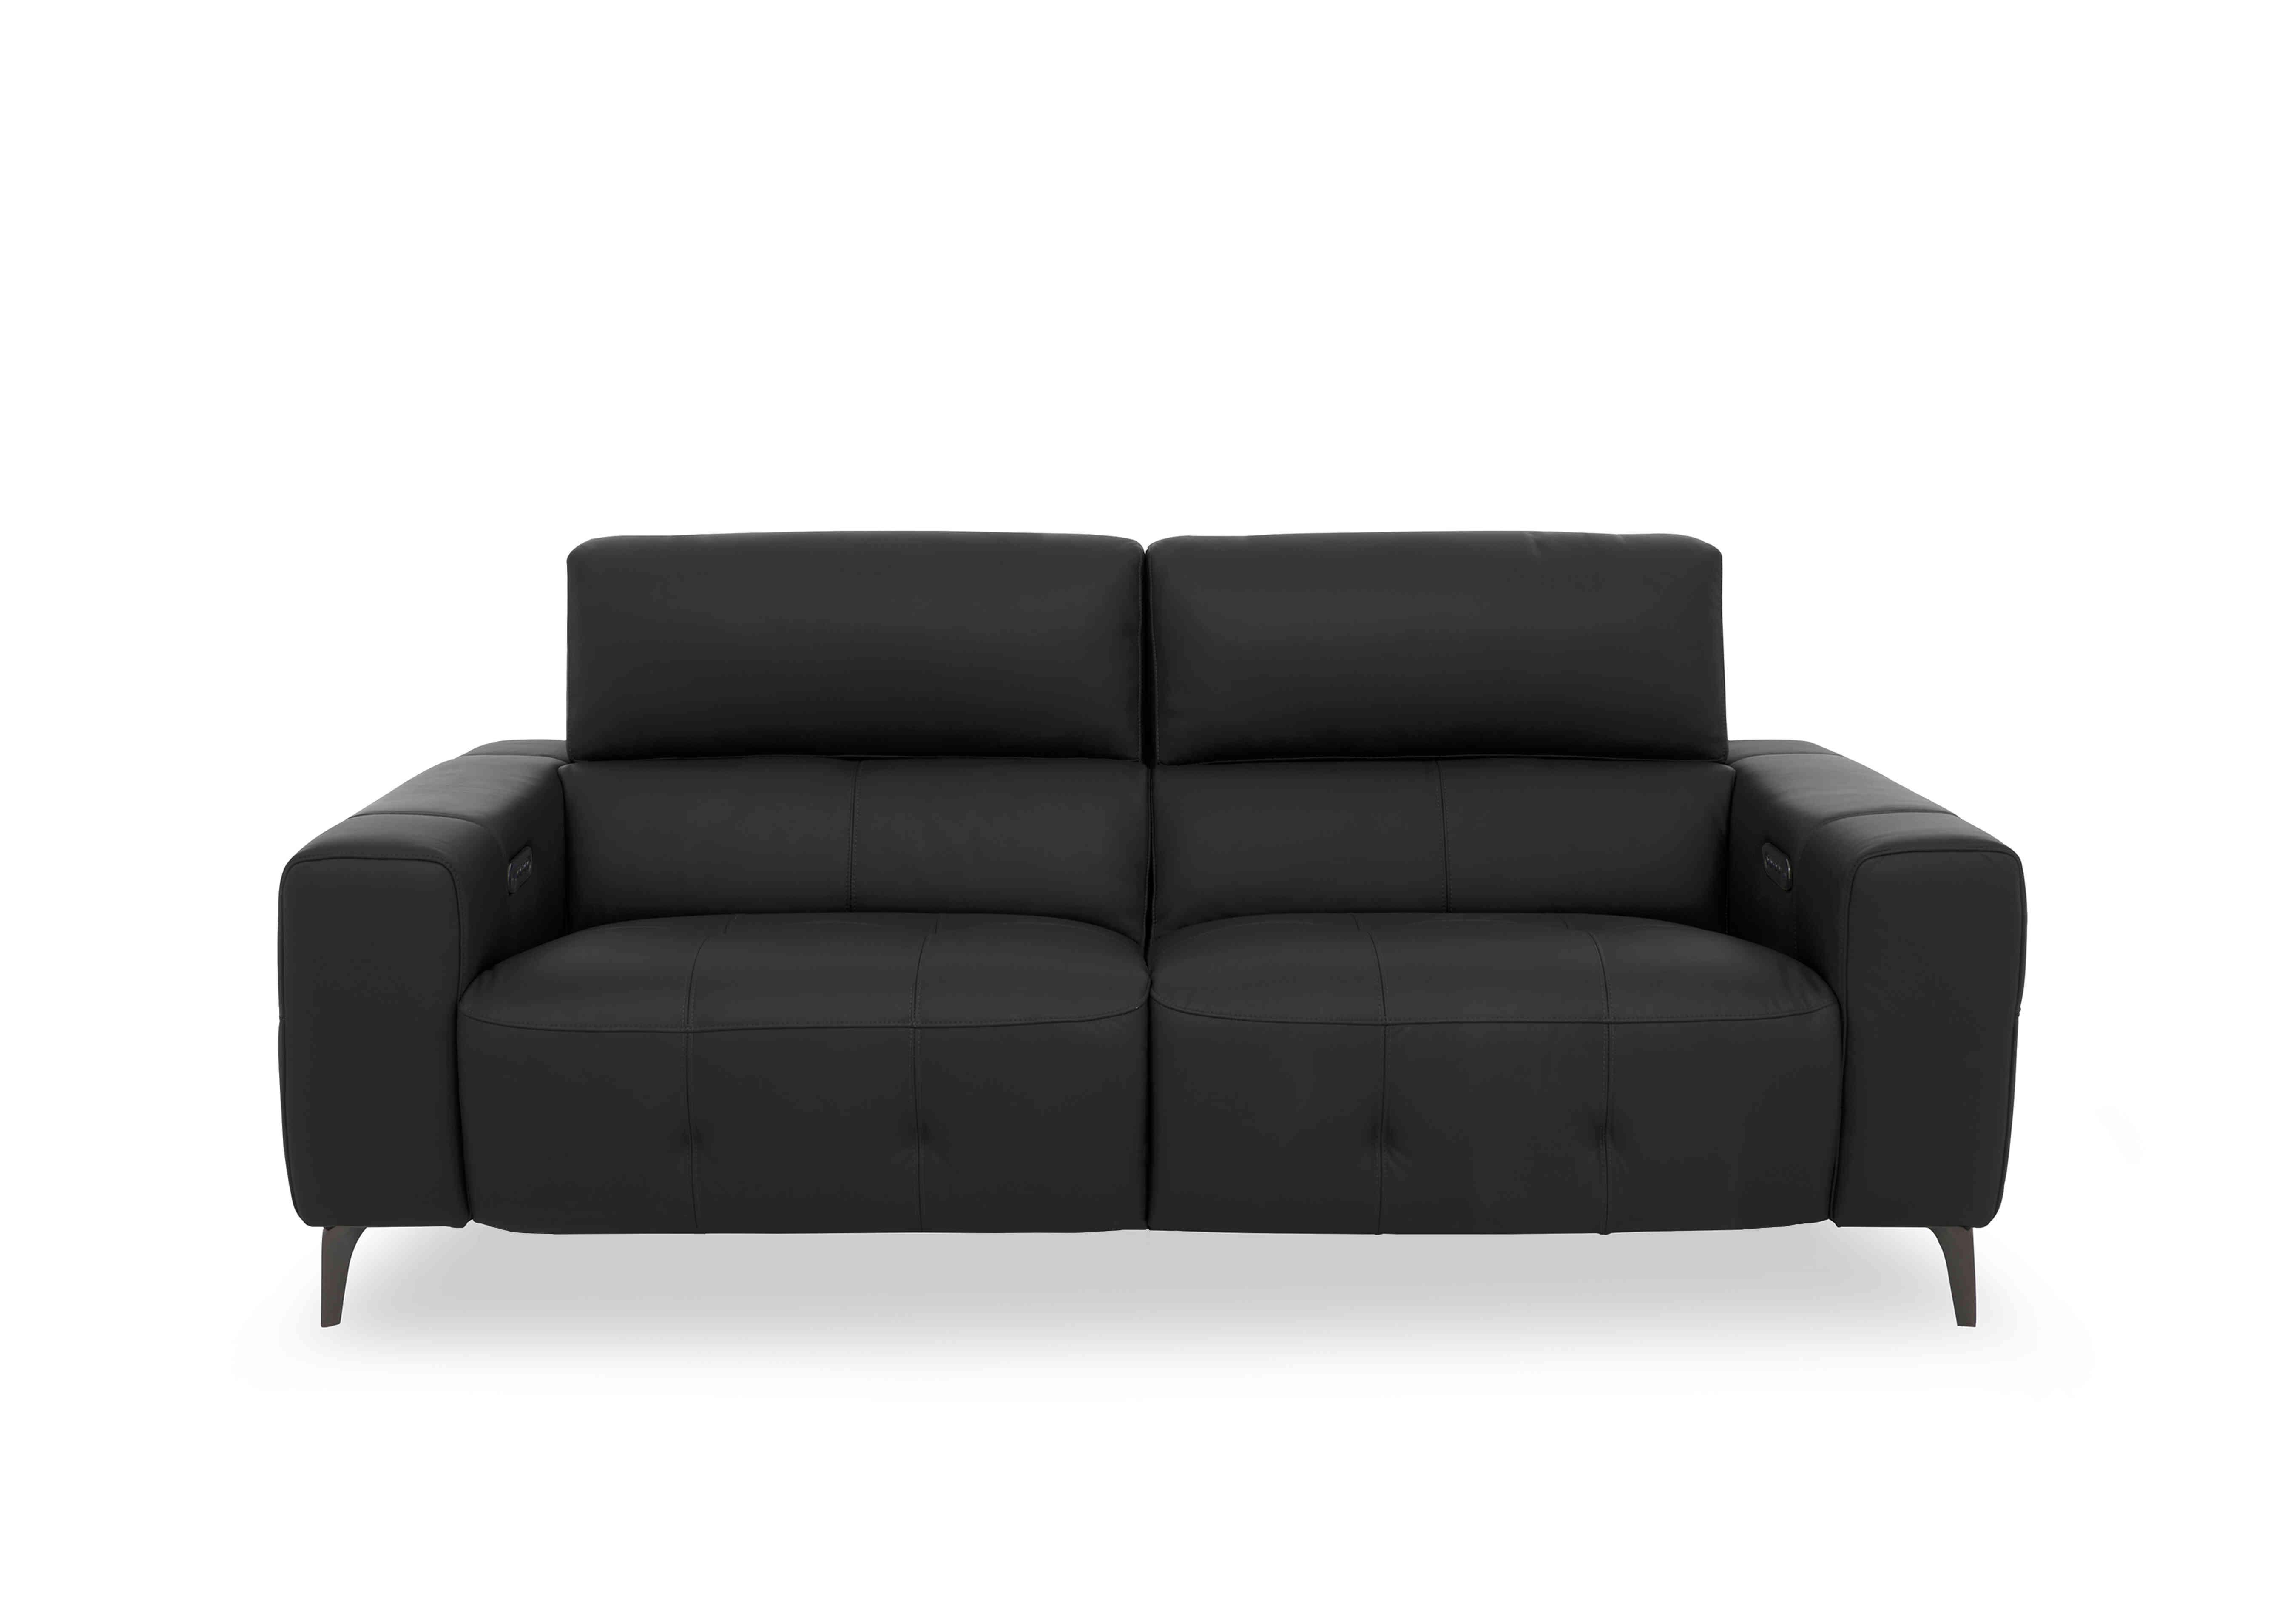 New York 3 Seater Leather Sofa in Bv-3500 Classic Black on Furniture Village